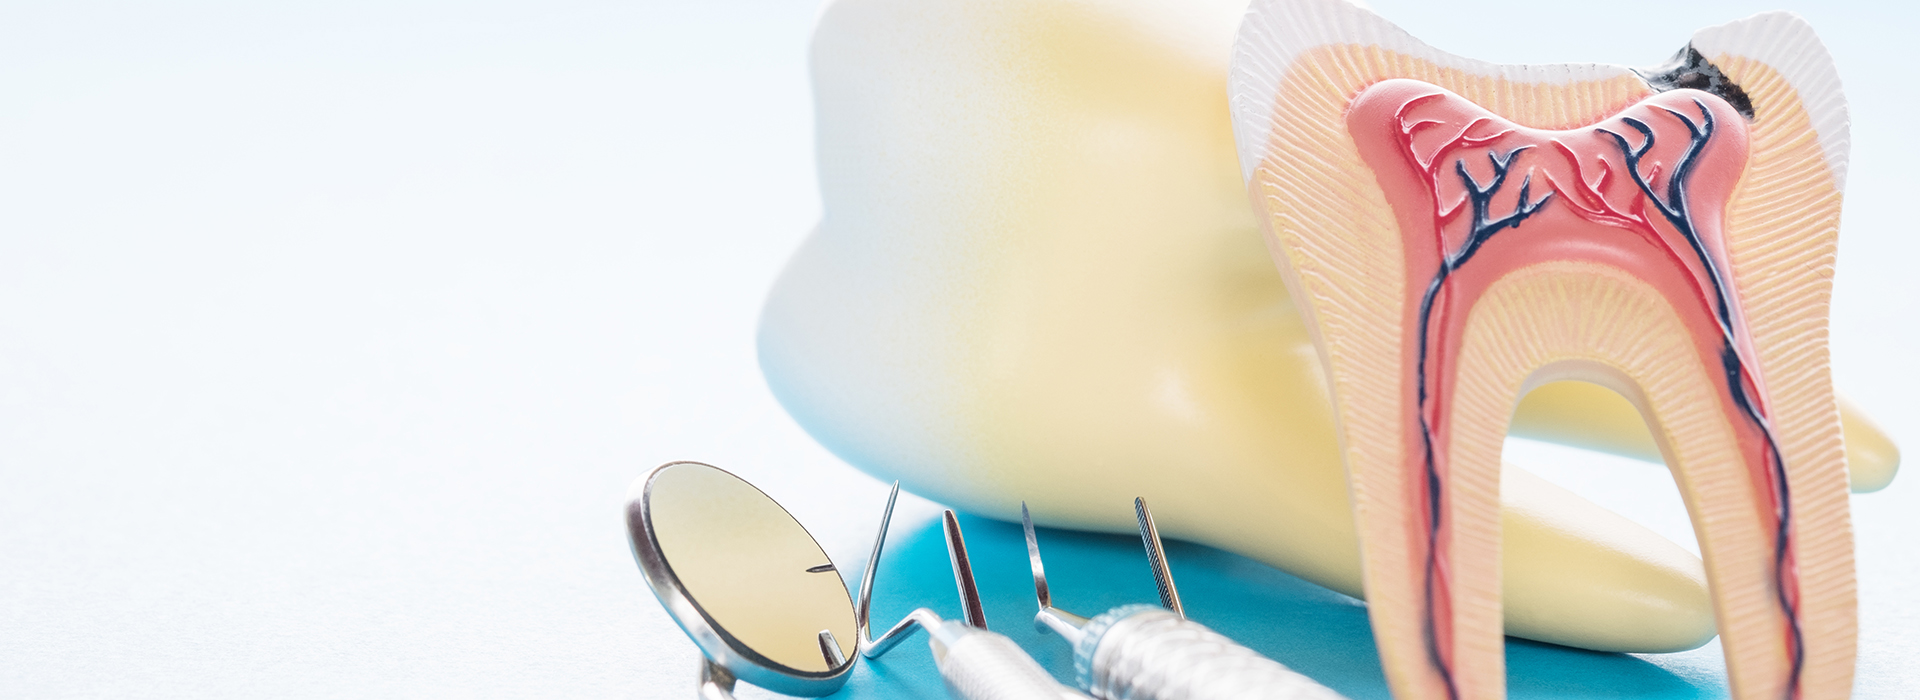 The image shows a close-up of dental tools, including a toothbrush and what appears to be a dental model with an exposed root system, set against a light blue background.